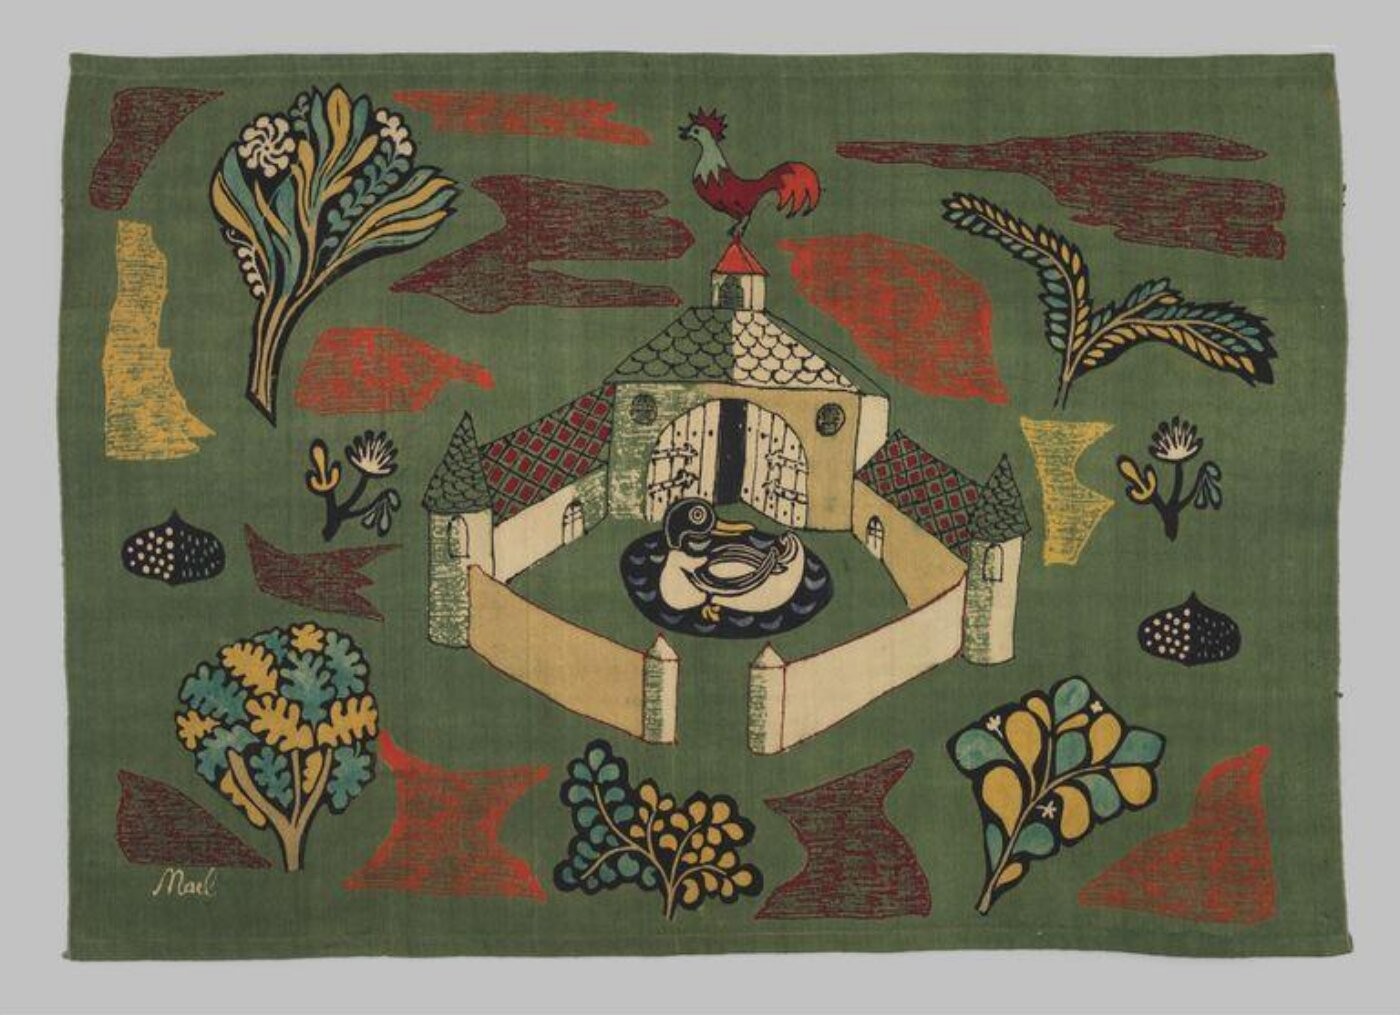 stenciled cloth, 1949, British; O'Connell, Michael for Heals. "The Old Farmyard"